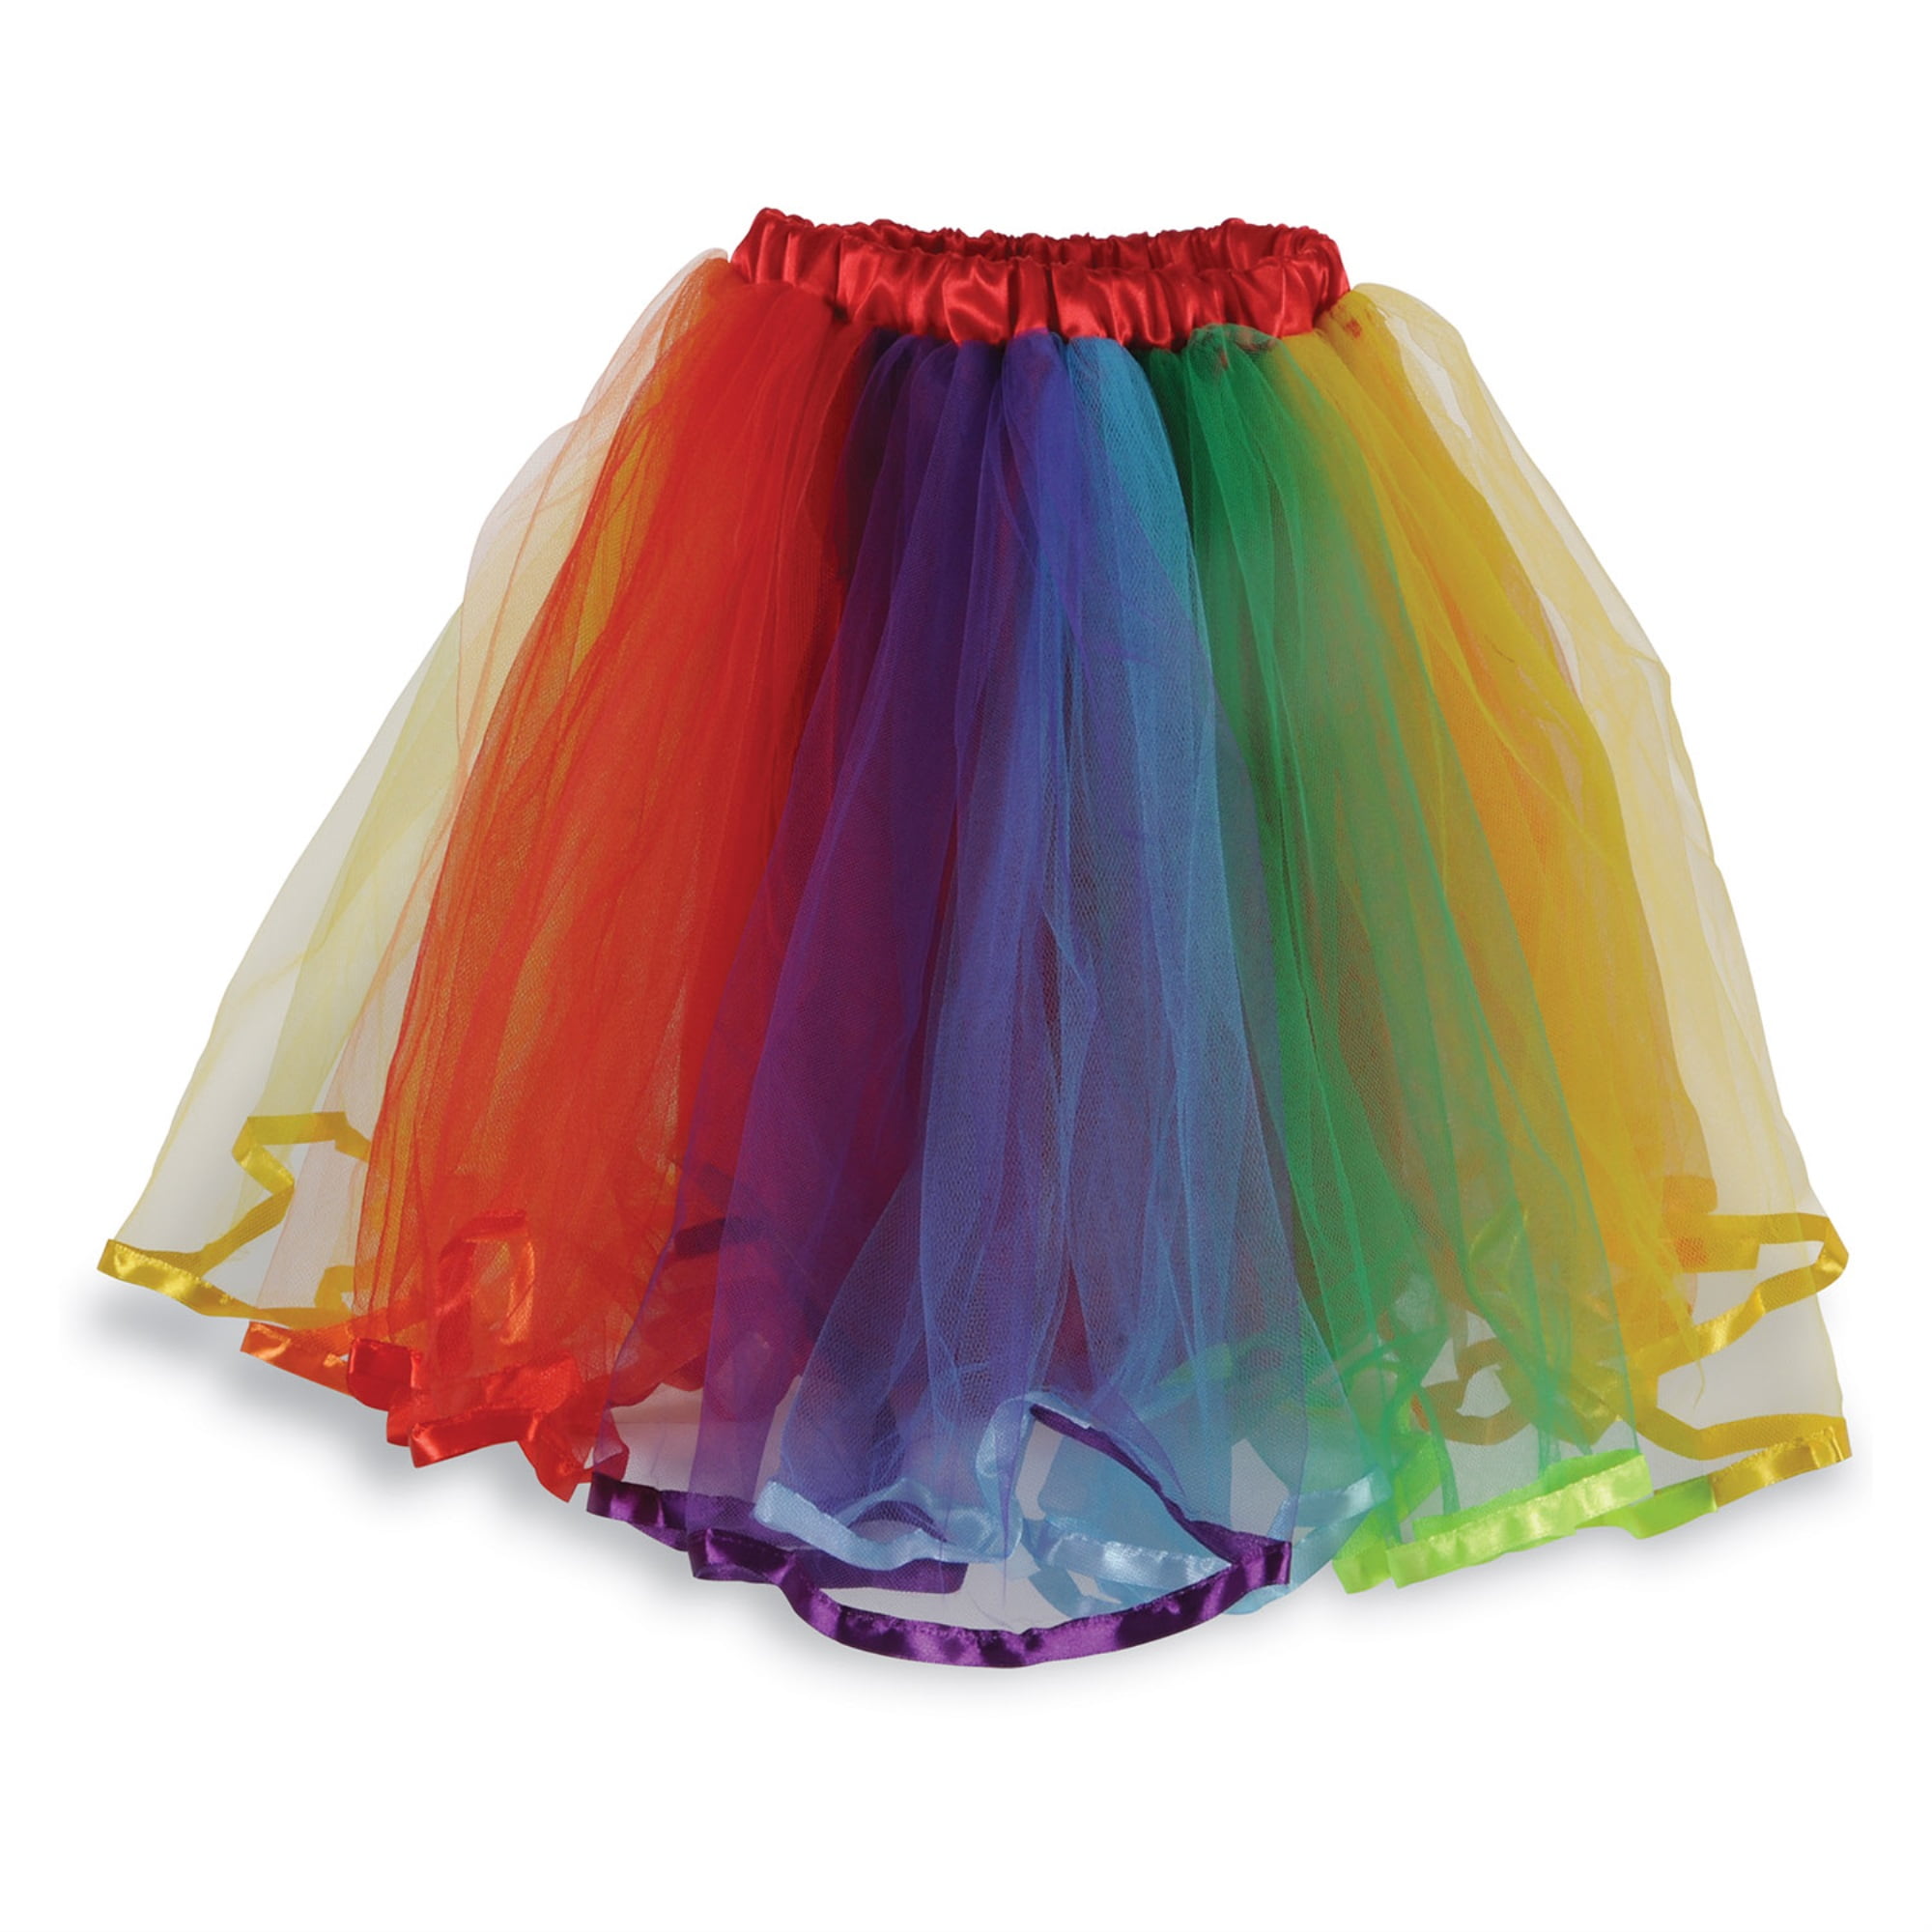 Picture of Beistle 60969 Rainbow Tutu - One Size - Pack of 6